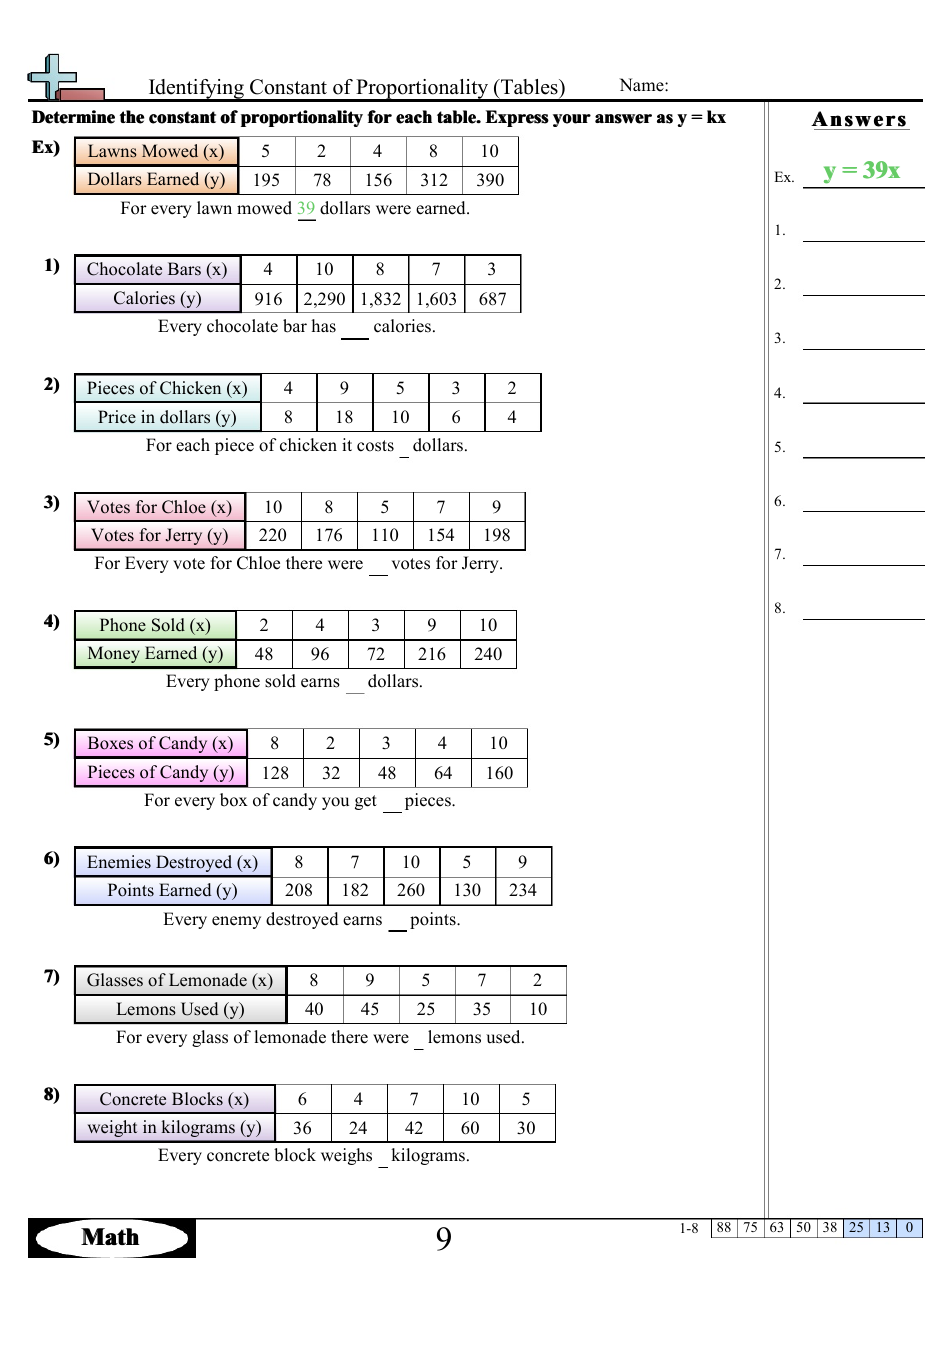 Identifying Constant of Proportionality (Tables) Worksheet With Answer